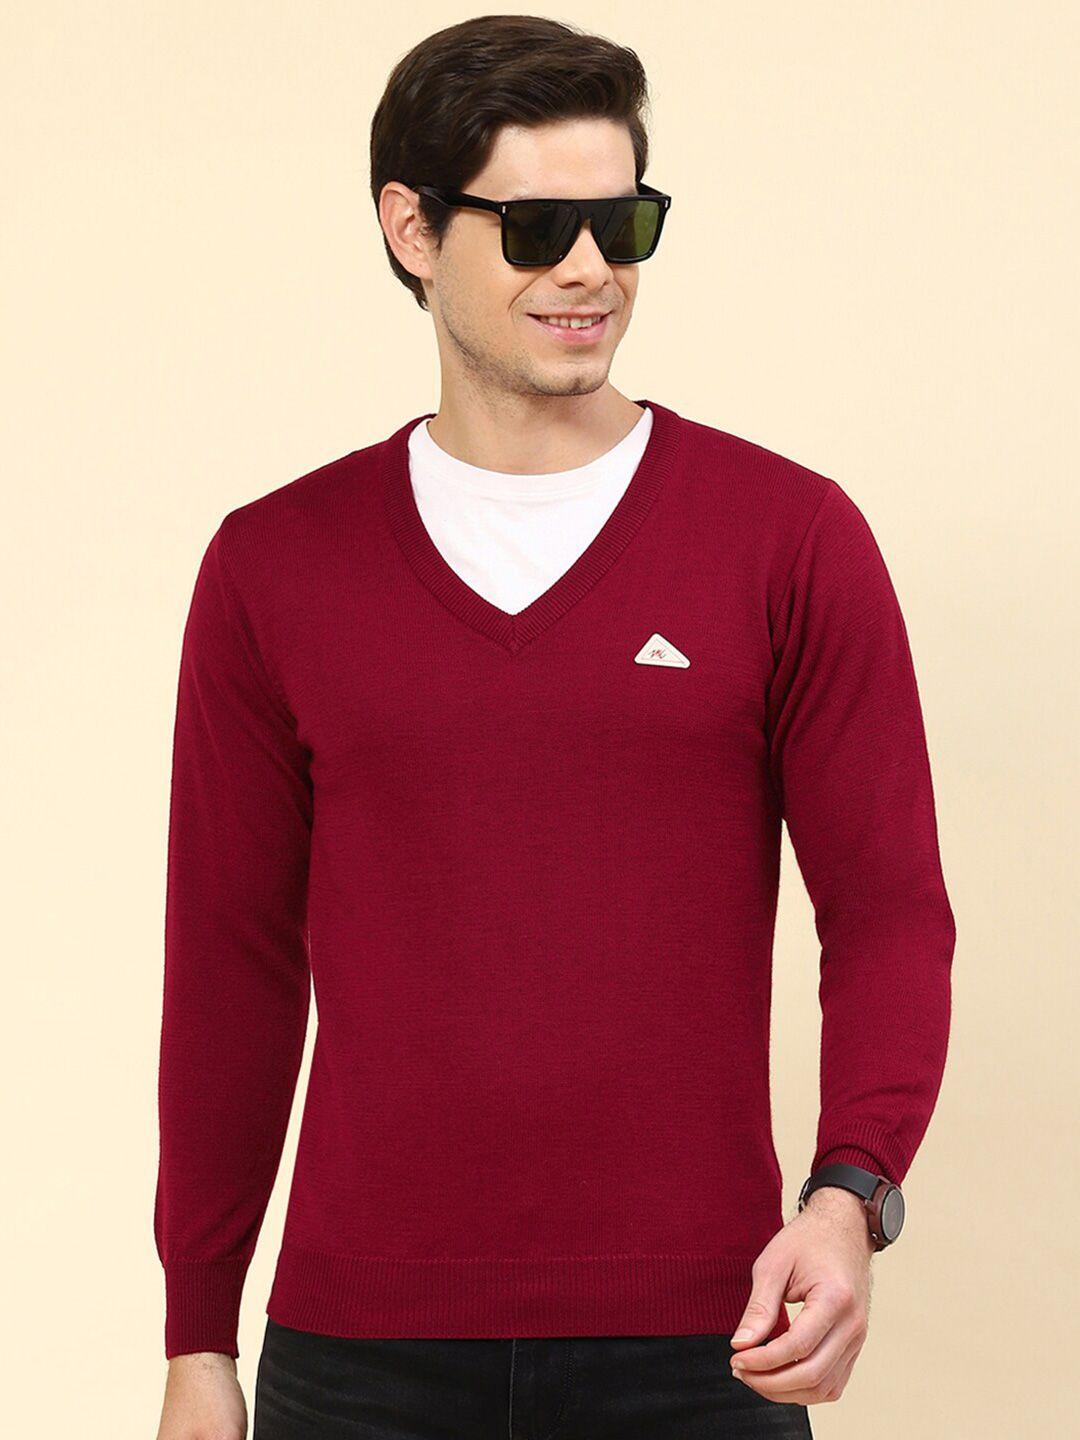 monte carlo v-neck wool pullover sweater